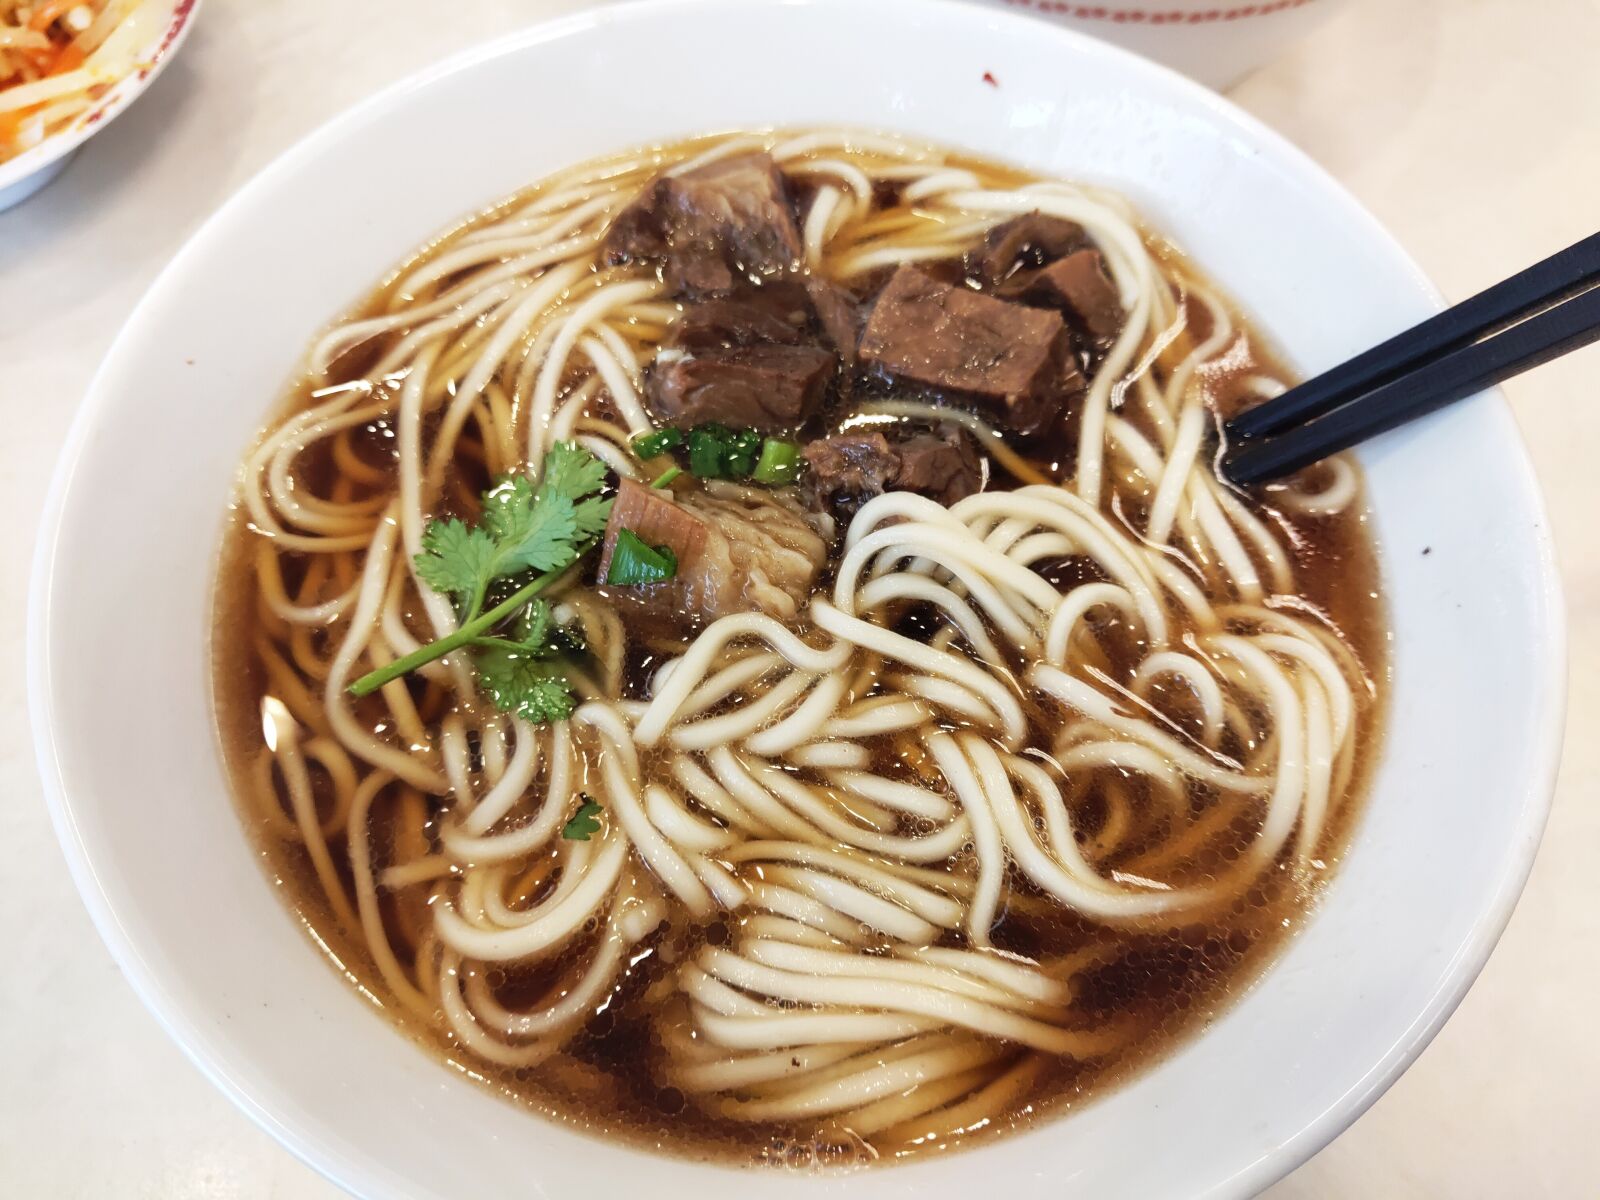 Meizu 16th sample photo. Beef noodles, noodles, food photography